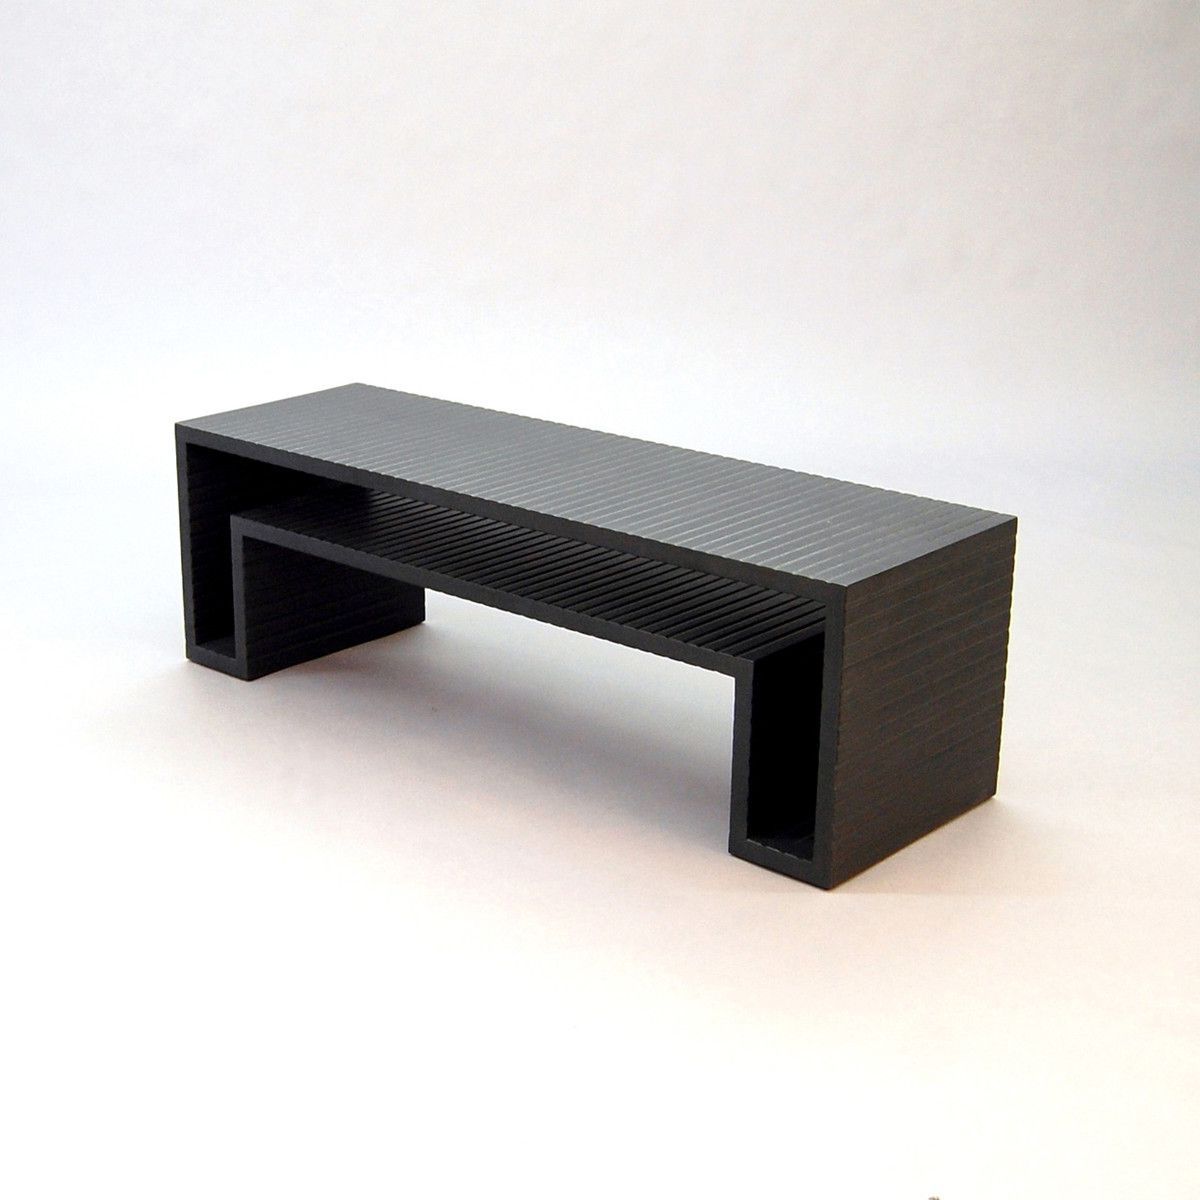 Geometric Furniture, L Shaped Pertaining To Latest L Shaped Coffee Tables (Gallery 11 of 20)